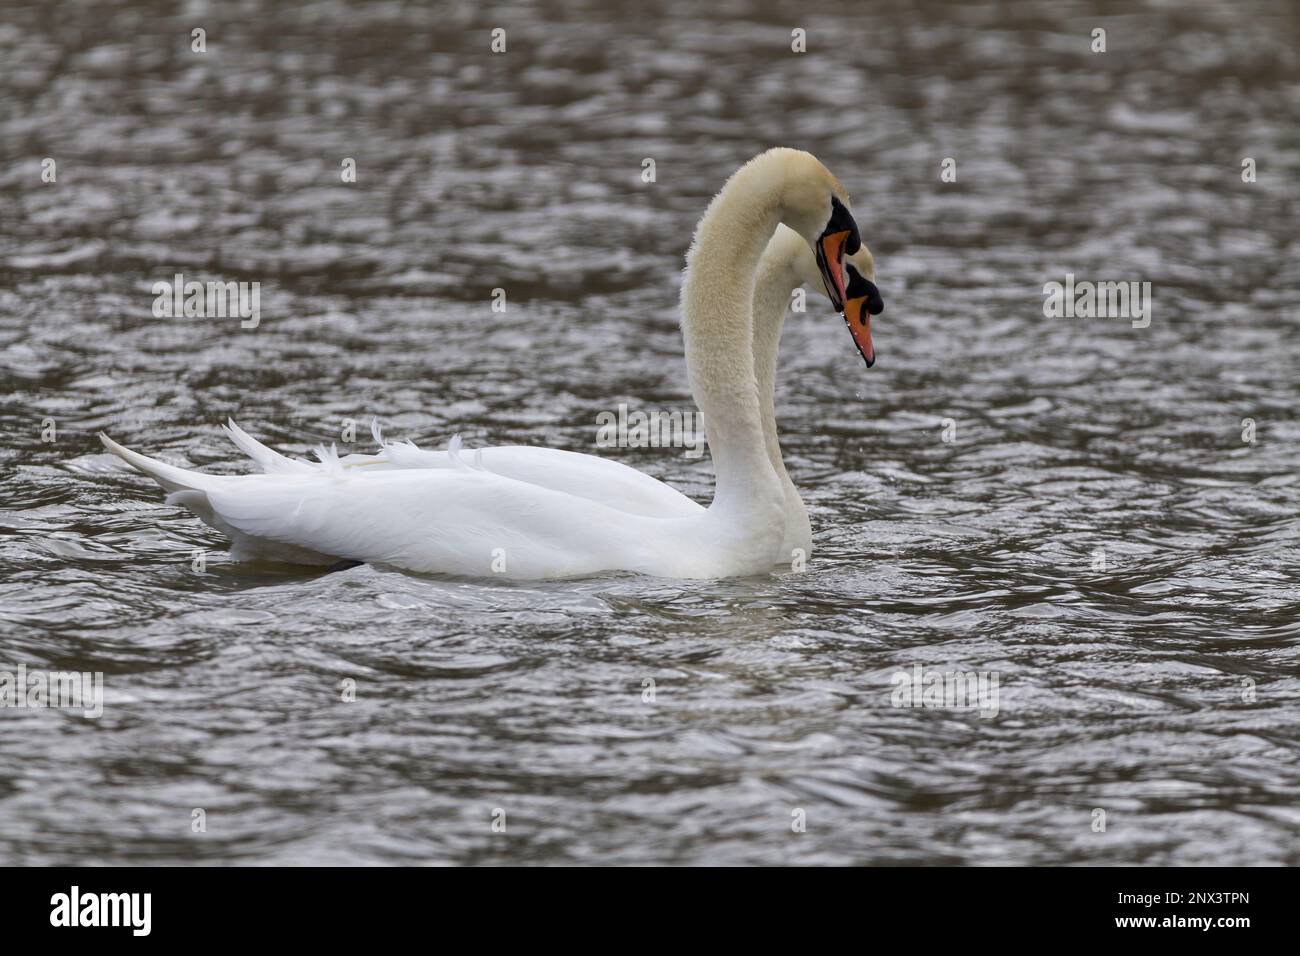 Mute swan Cygnus olor, Breeding season early spring uk pair white plumage long neck orange red bill with black base and knob courting display in water Stock Photo